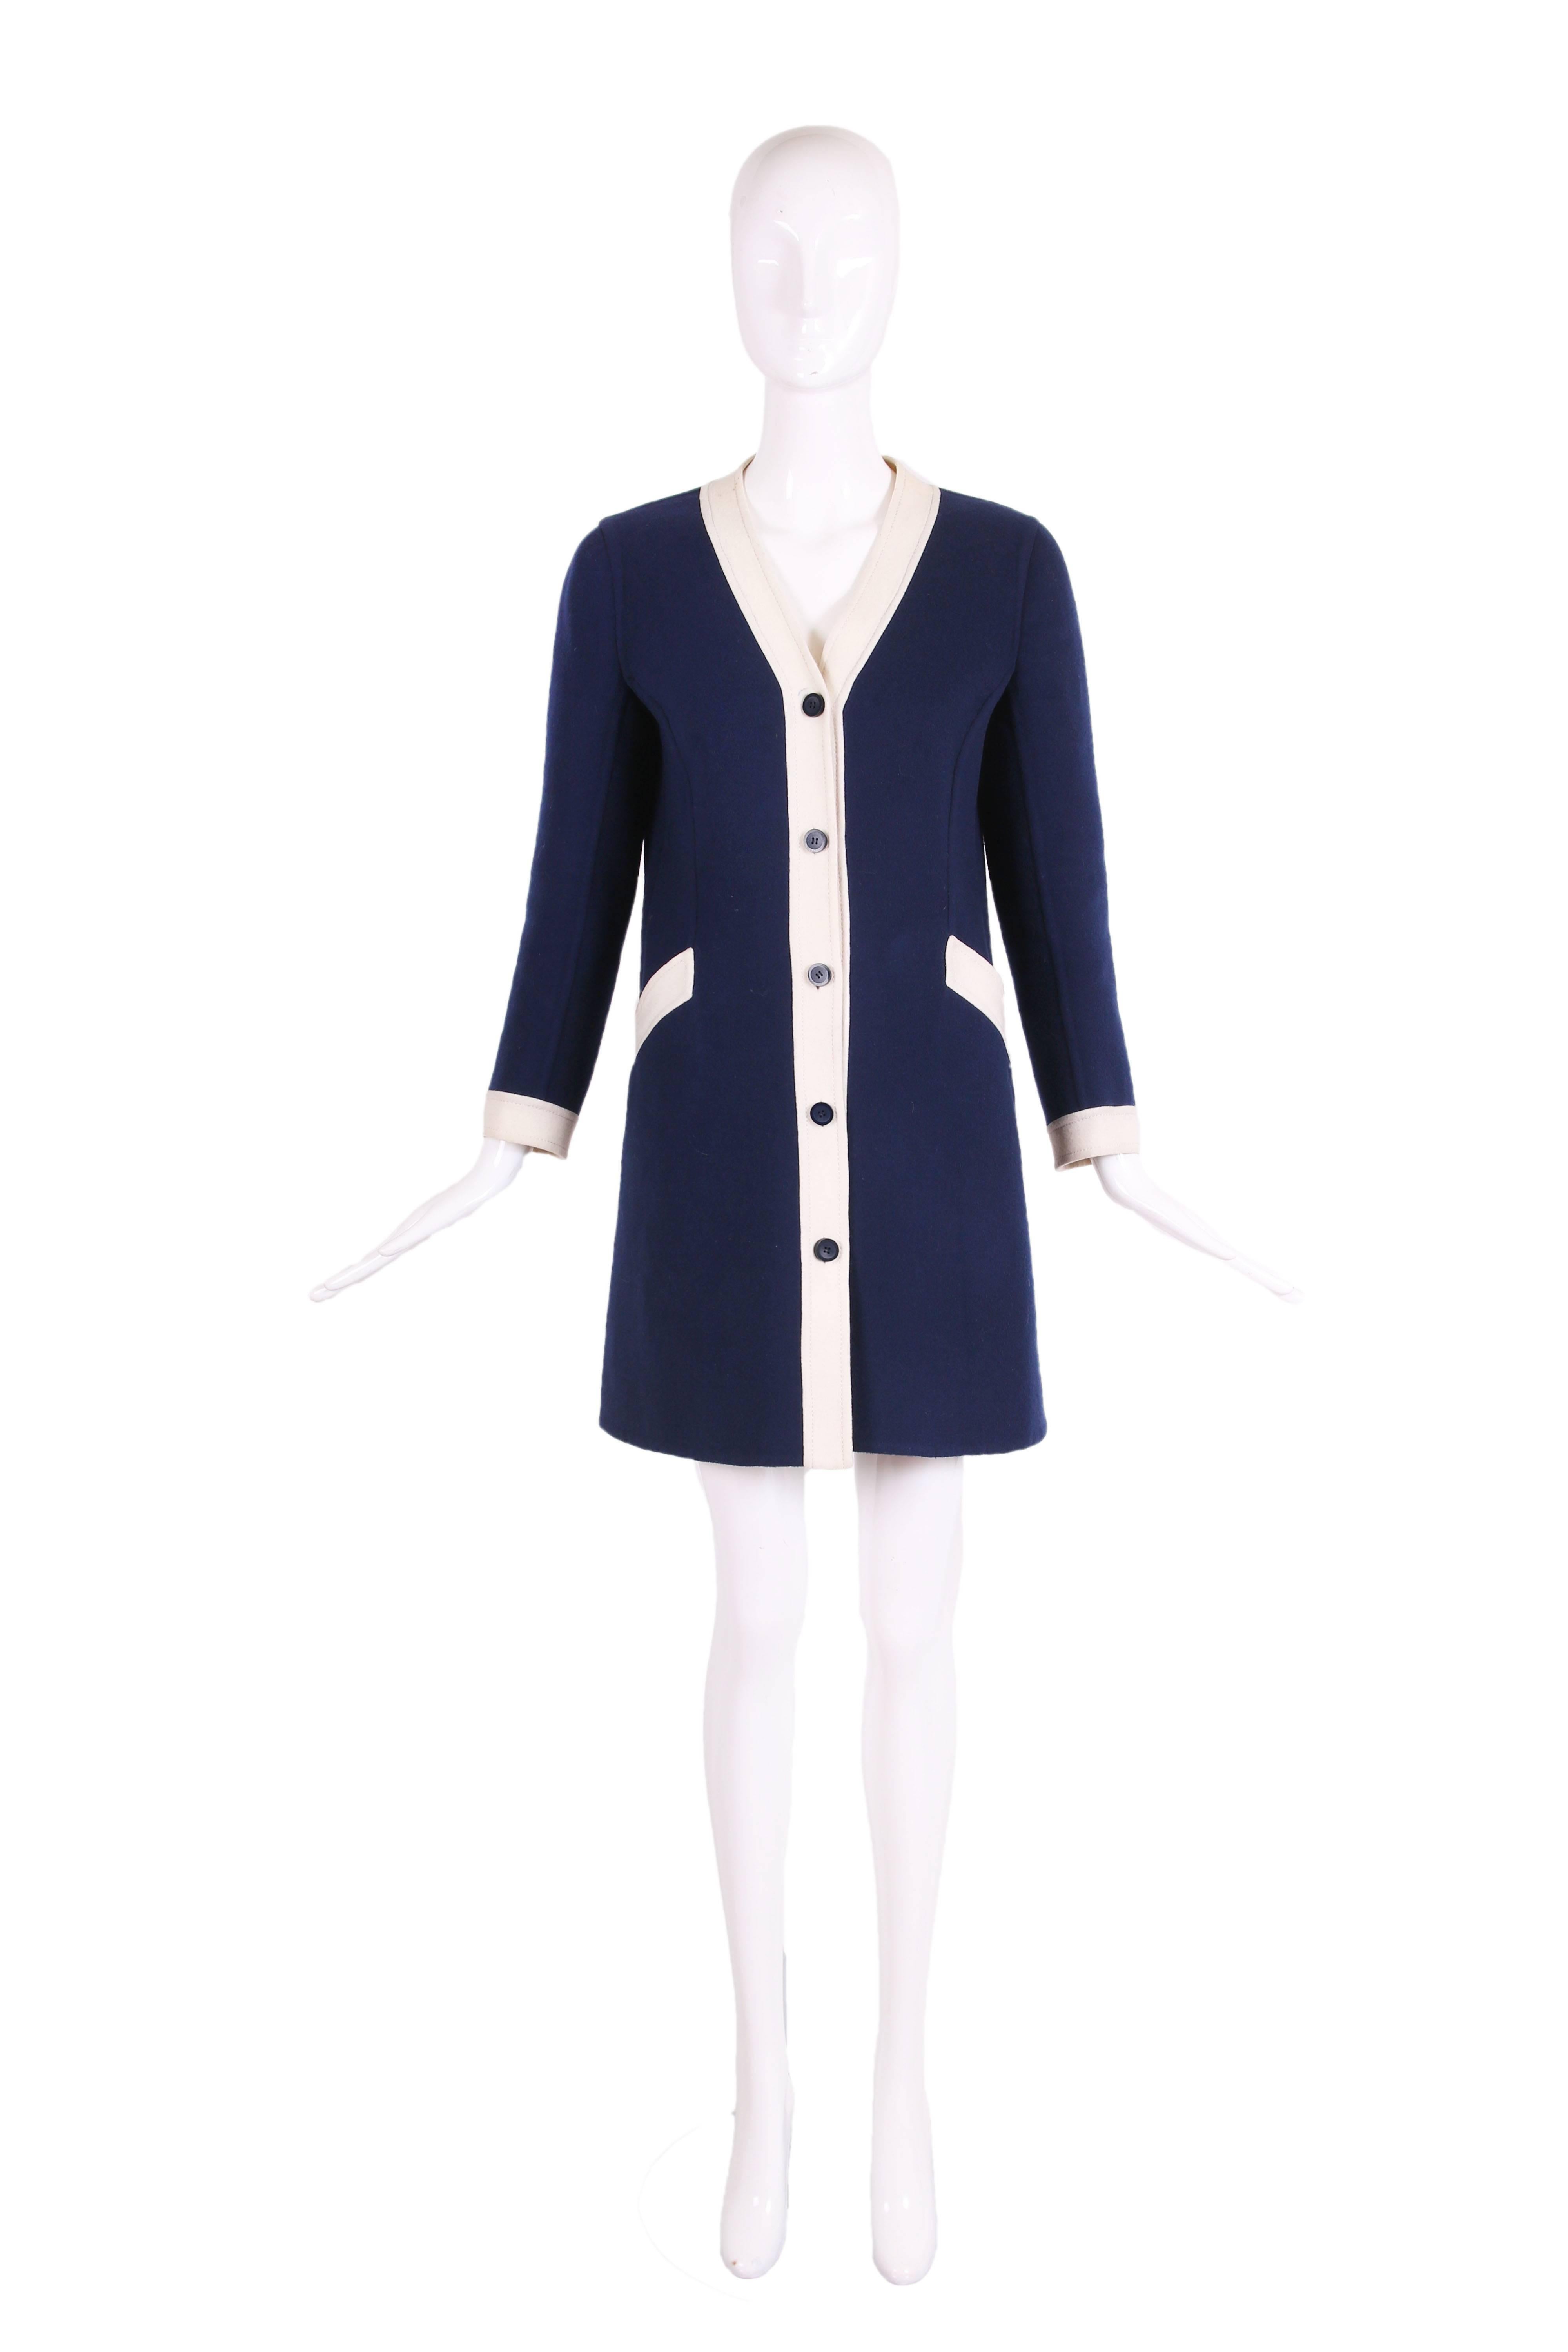 1970's Valentino navy melton wool coat dress featuring white trim, navy buttons down center front, and two frontal pockets. In excellent condition with a few unnoticeable marks at right shoulder and light blue mark near top button - it has not been